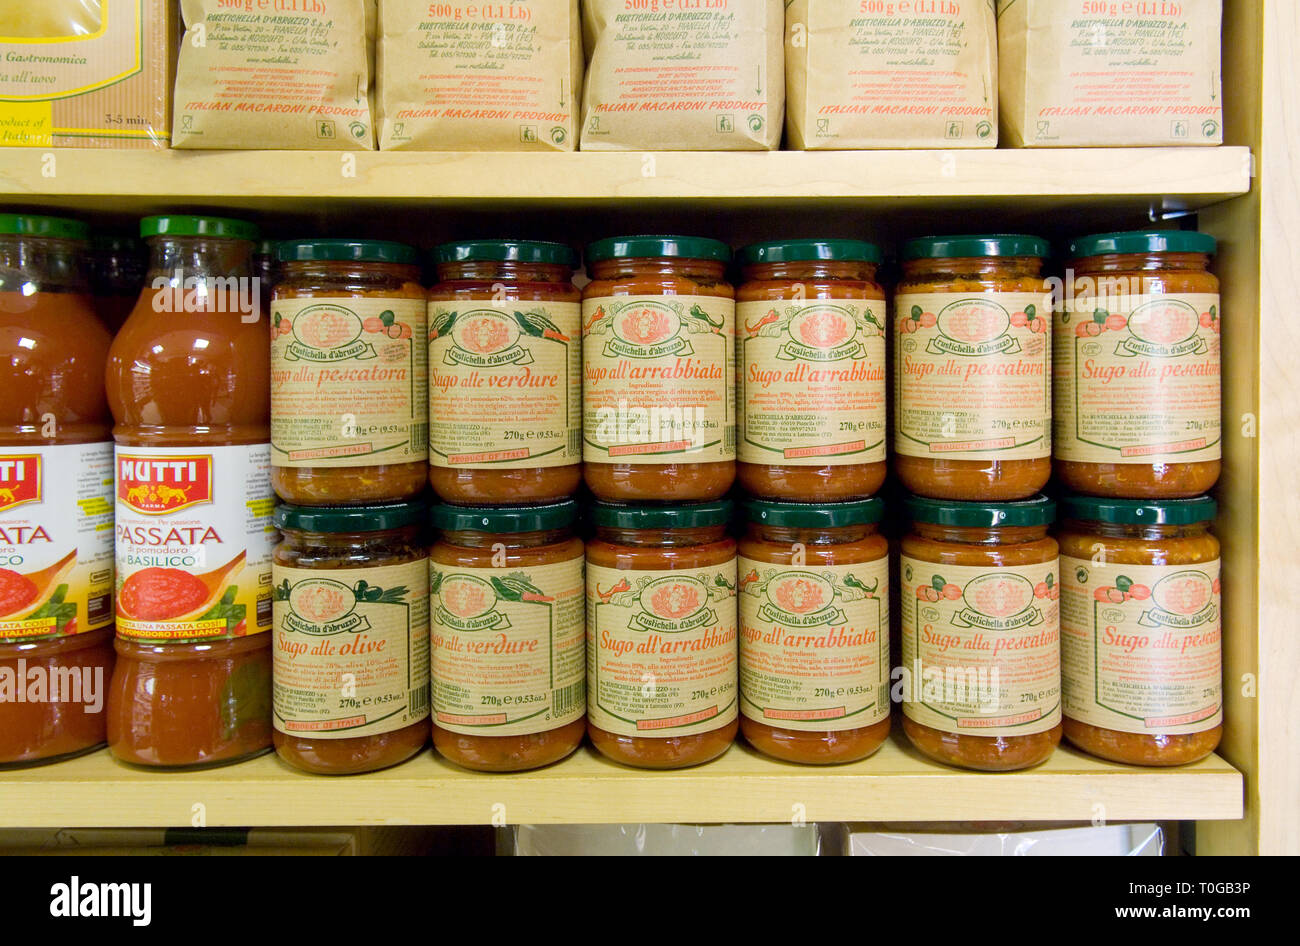 Displays of various pasta and jars of pasta sauce on display in a specialist shop. Stock Photo